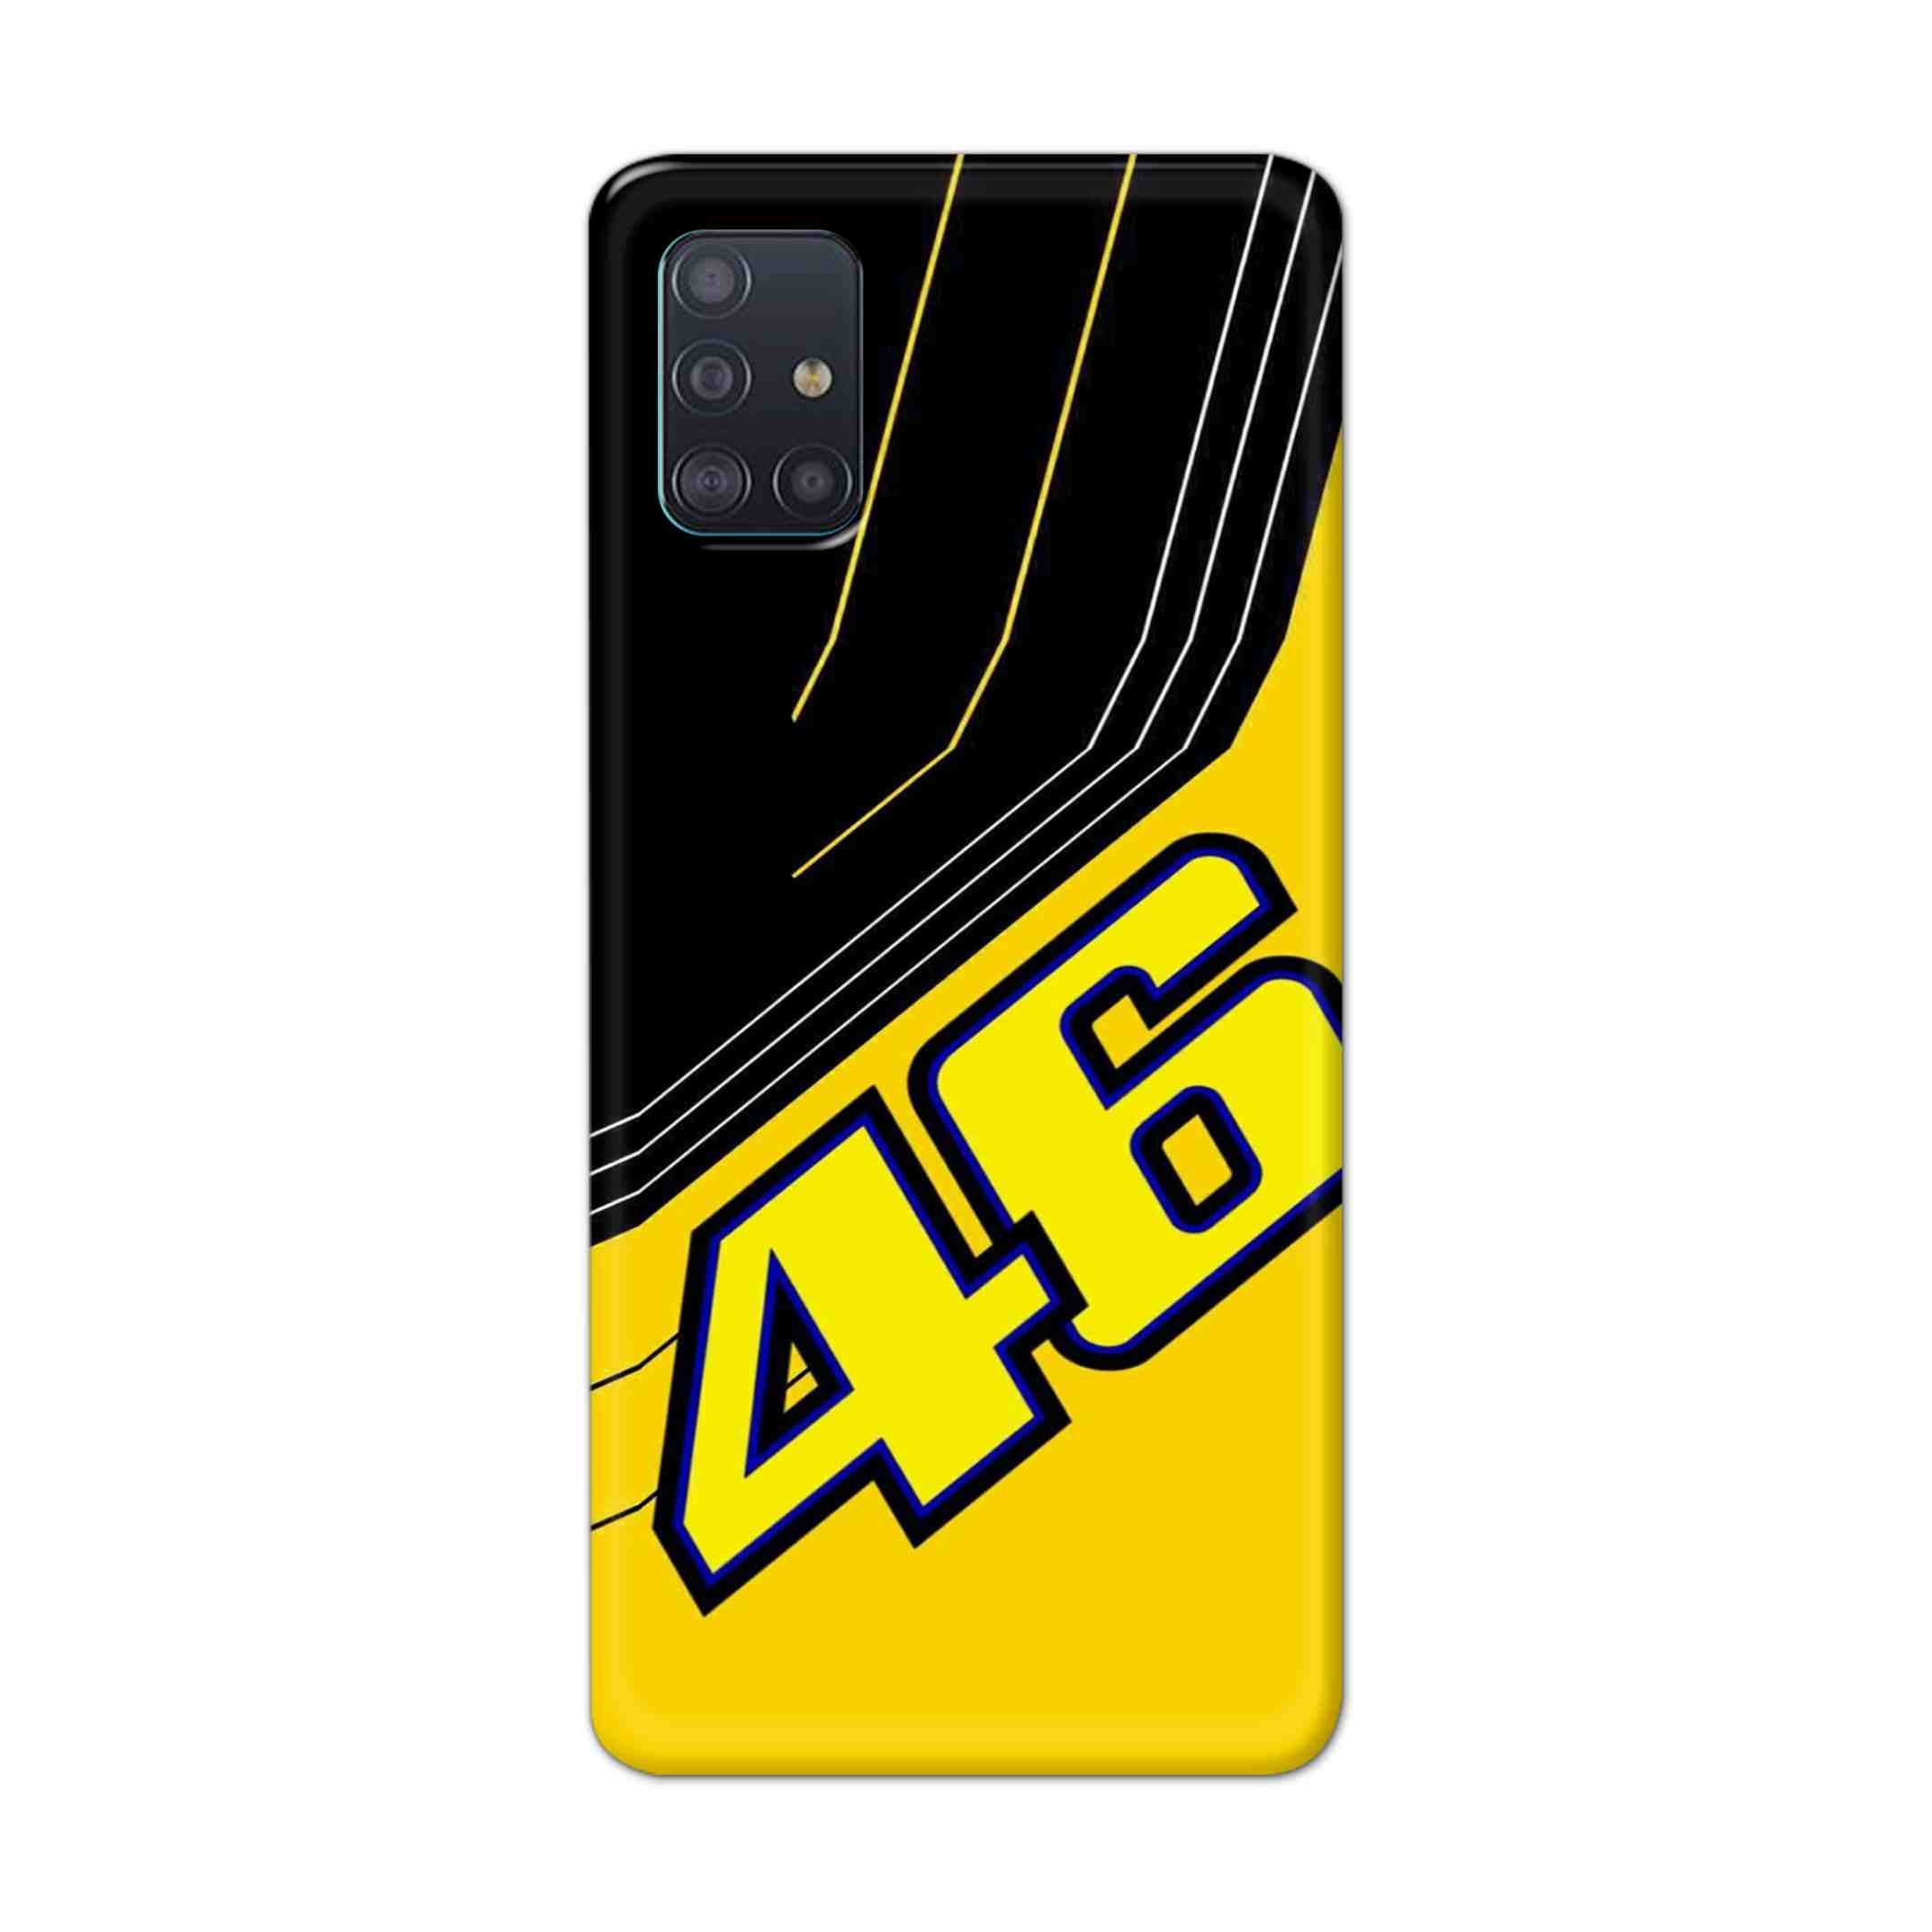 Buy 46 Hard Back Mobile Phone Case Cover For Samsung Galaxy A71 Online